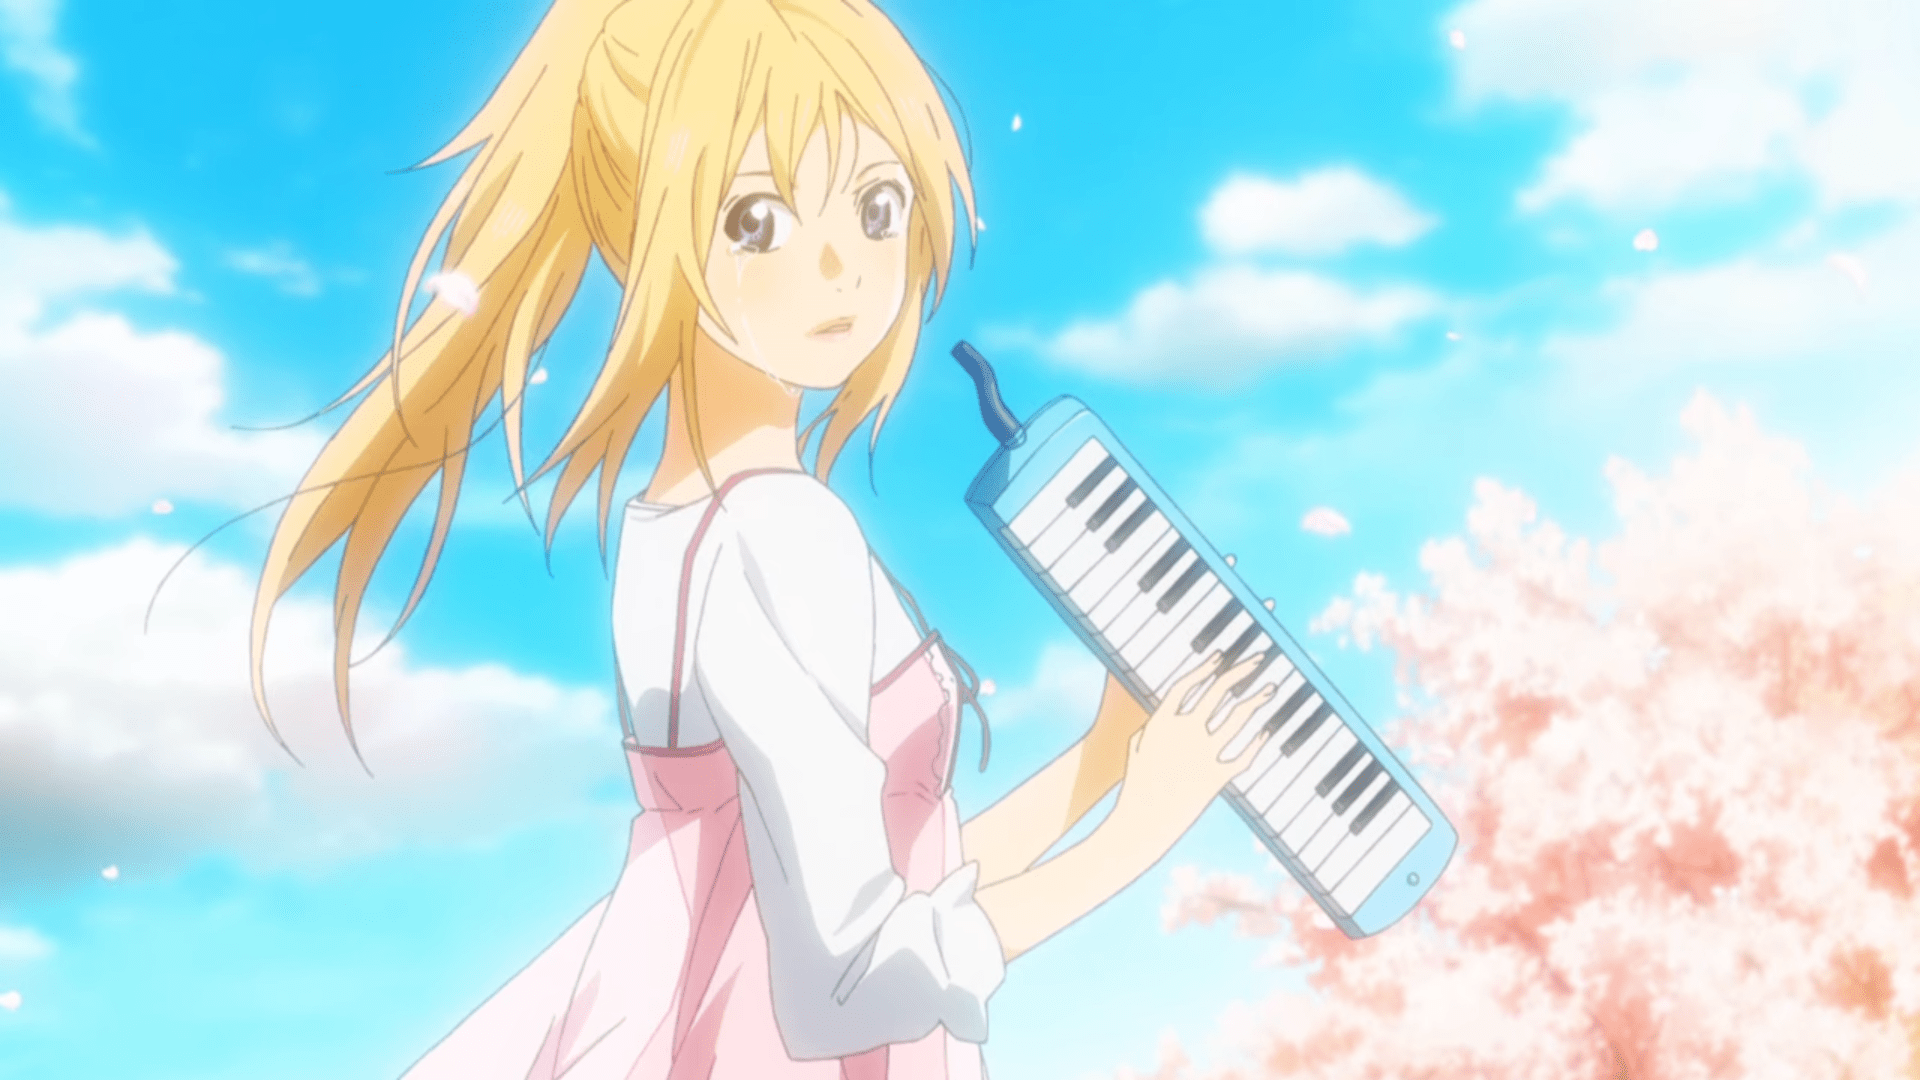 Miyazono, Kaori from Your Lie In April holds a melodica in her hands and stares toward the audience with tears falling from her eyes.